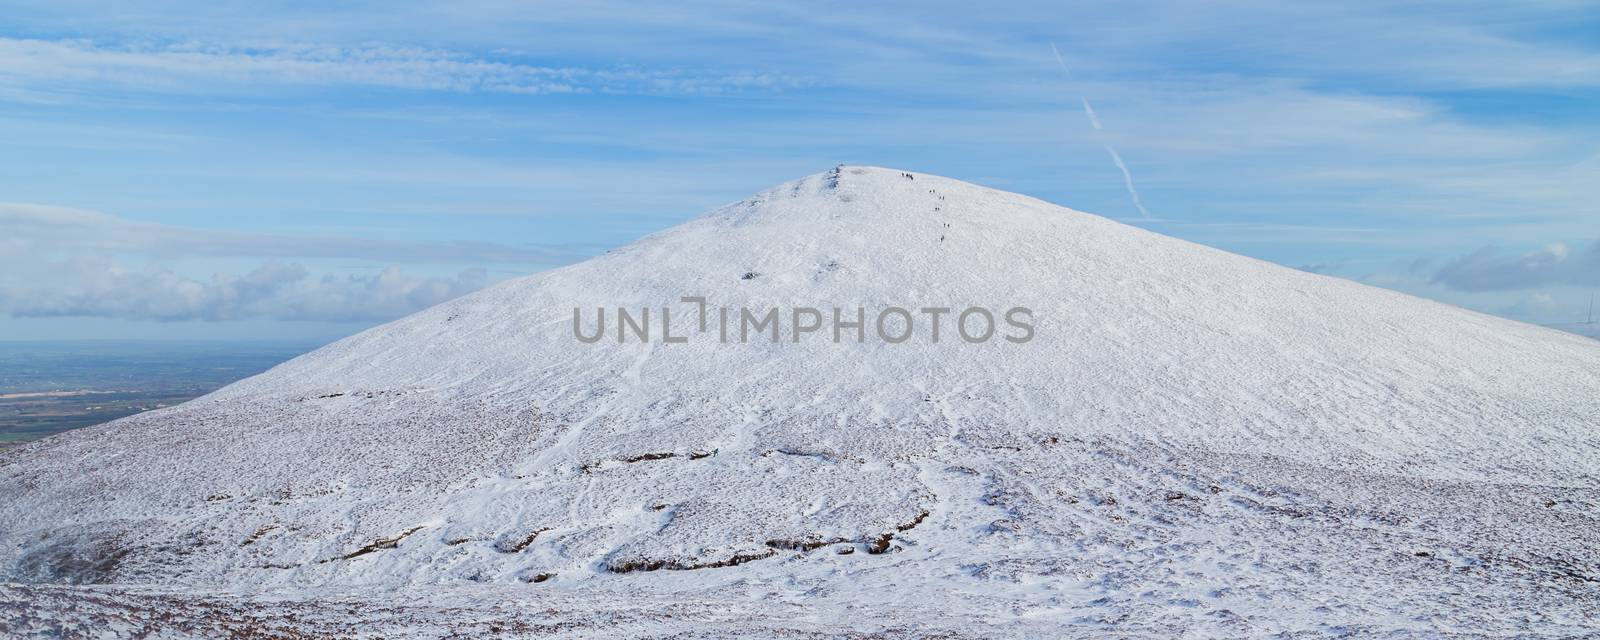 Snow in the the Paps of Anu, Co Kerry, Ireland